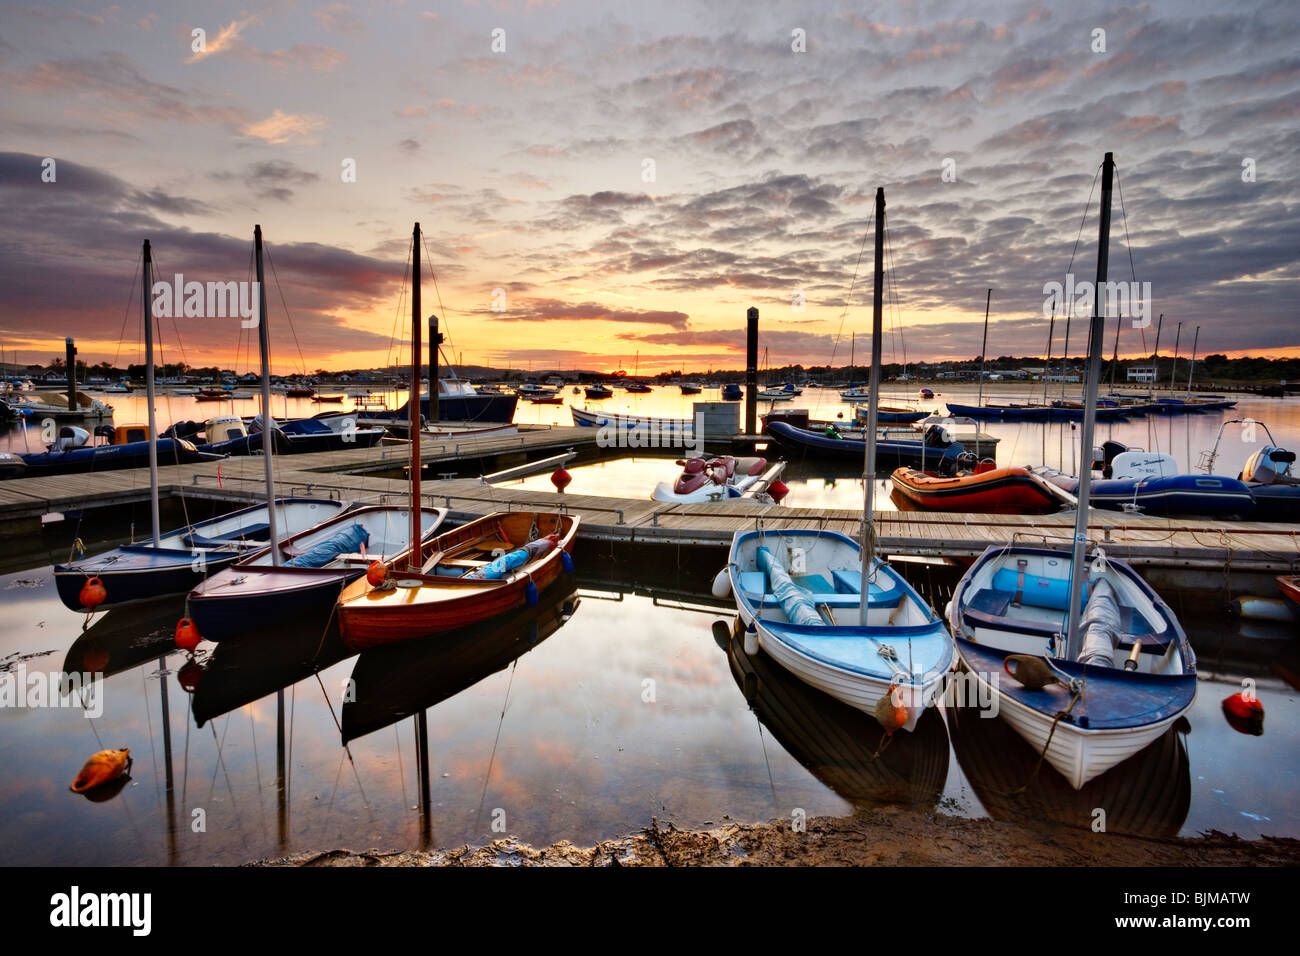 Sun setting over boats moored at Bembridge Harbour. Isle of Wight, England, UK Stock Photo